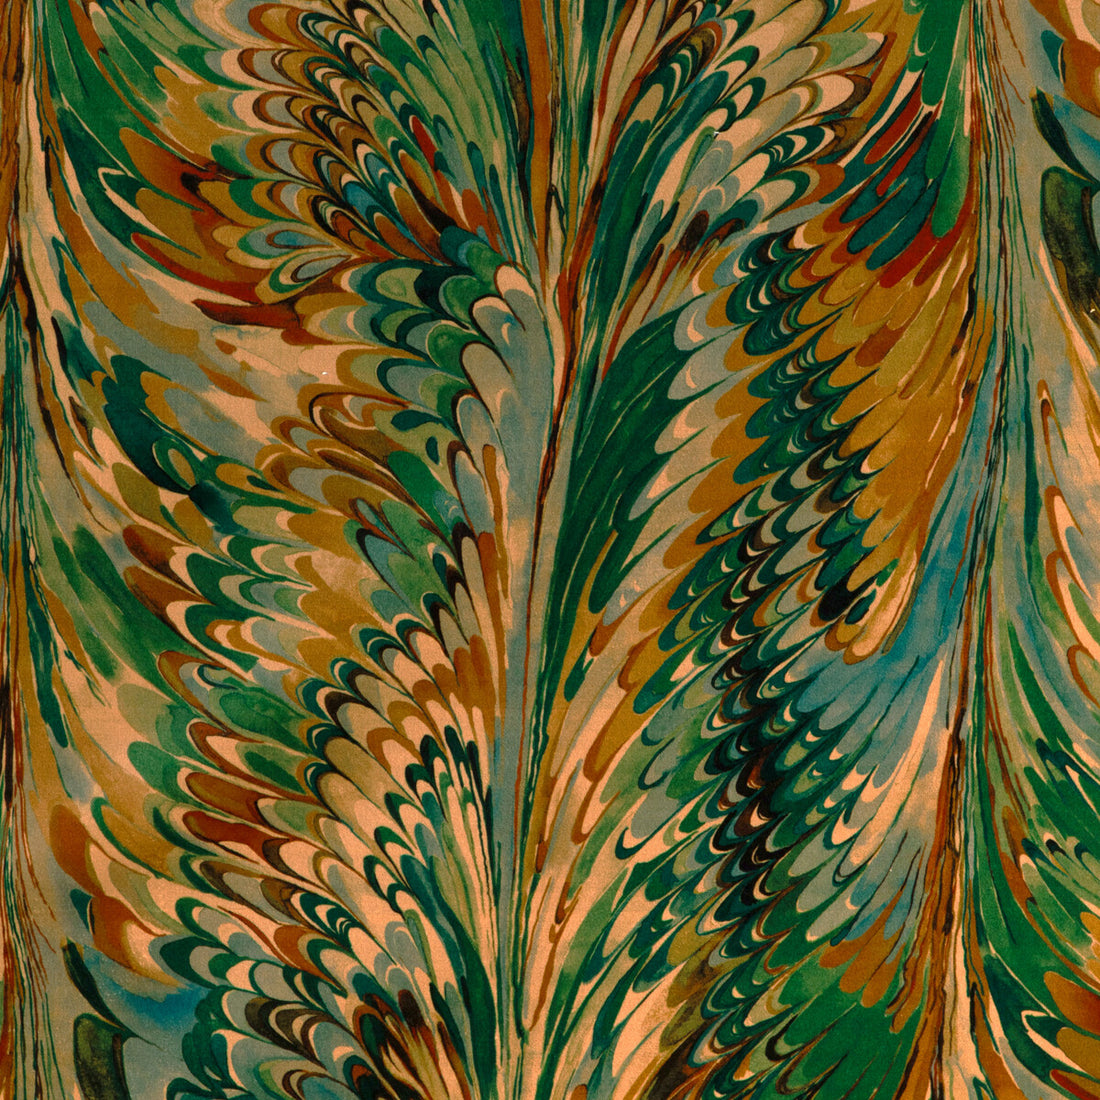 Taplow Velvet fabric in teal/bronze color - pattern 2023116.354.0 - by Lee Jofa in the Barwick Velvets collection